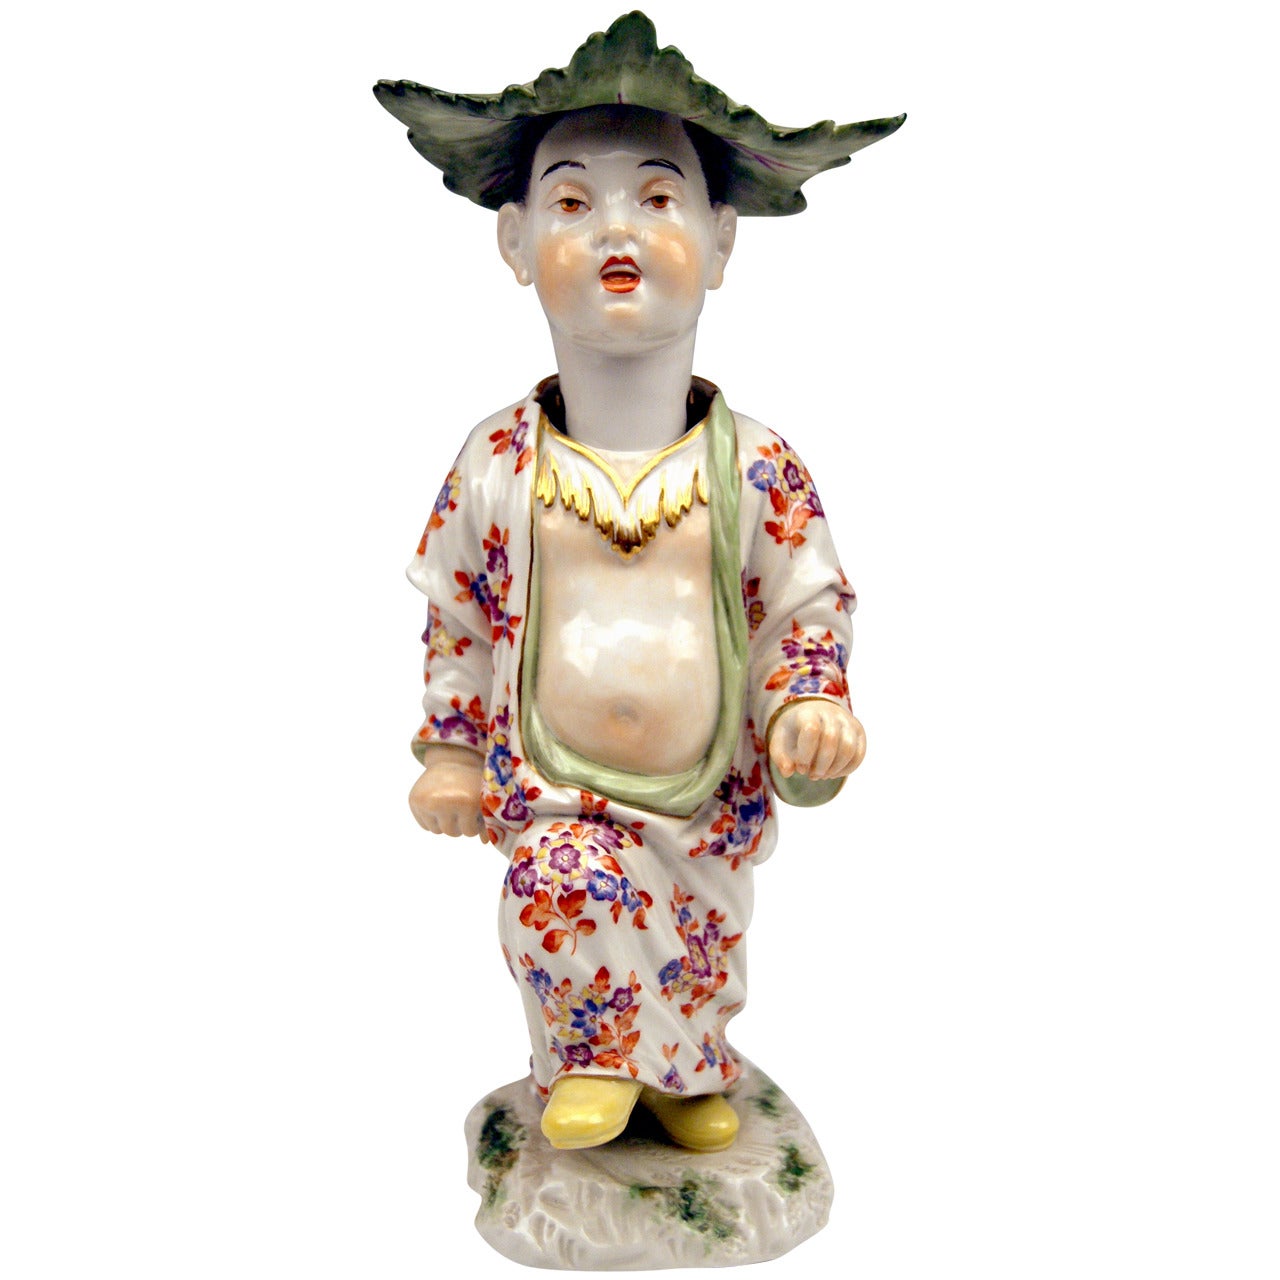 Meissen Chinese Boy with Hat made of Cabbages' Leaves Kändler made 20th century